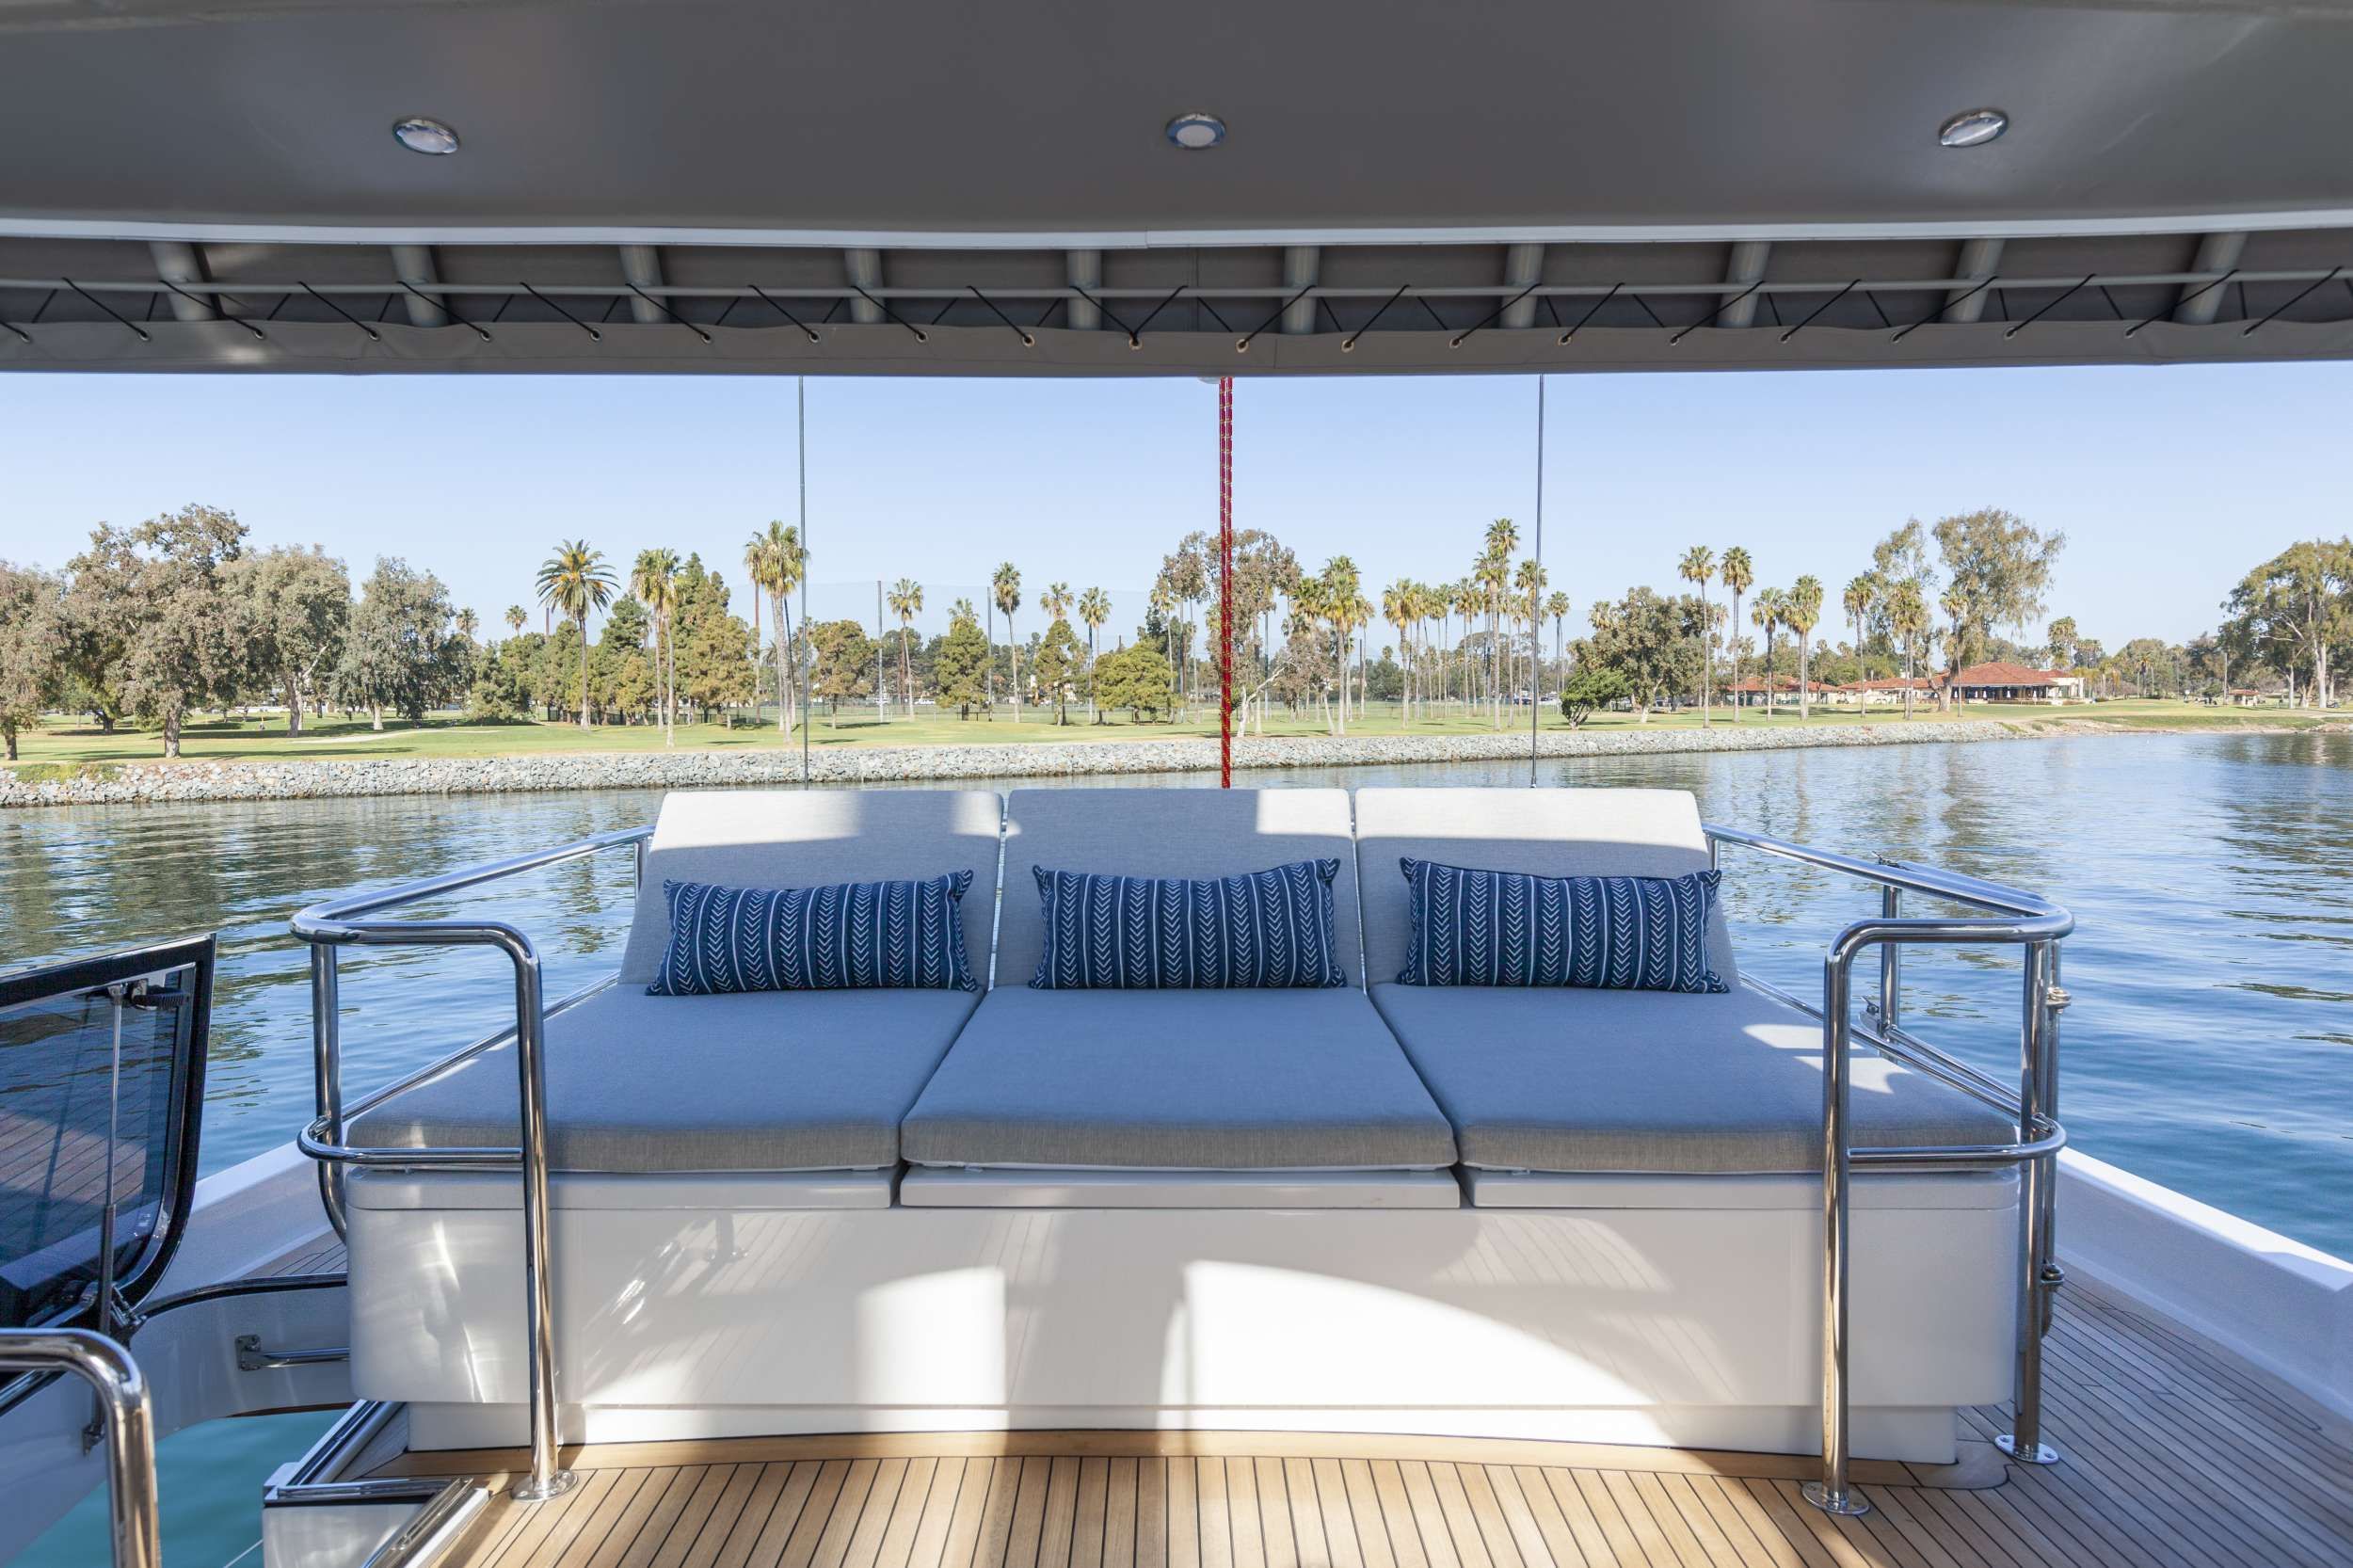 Reclining bench seat can fit up to 4 for an enjoyable view during sailing